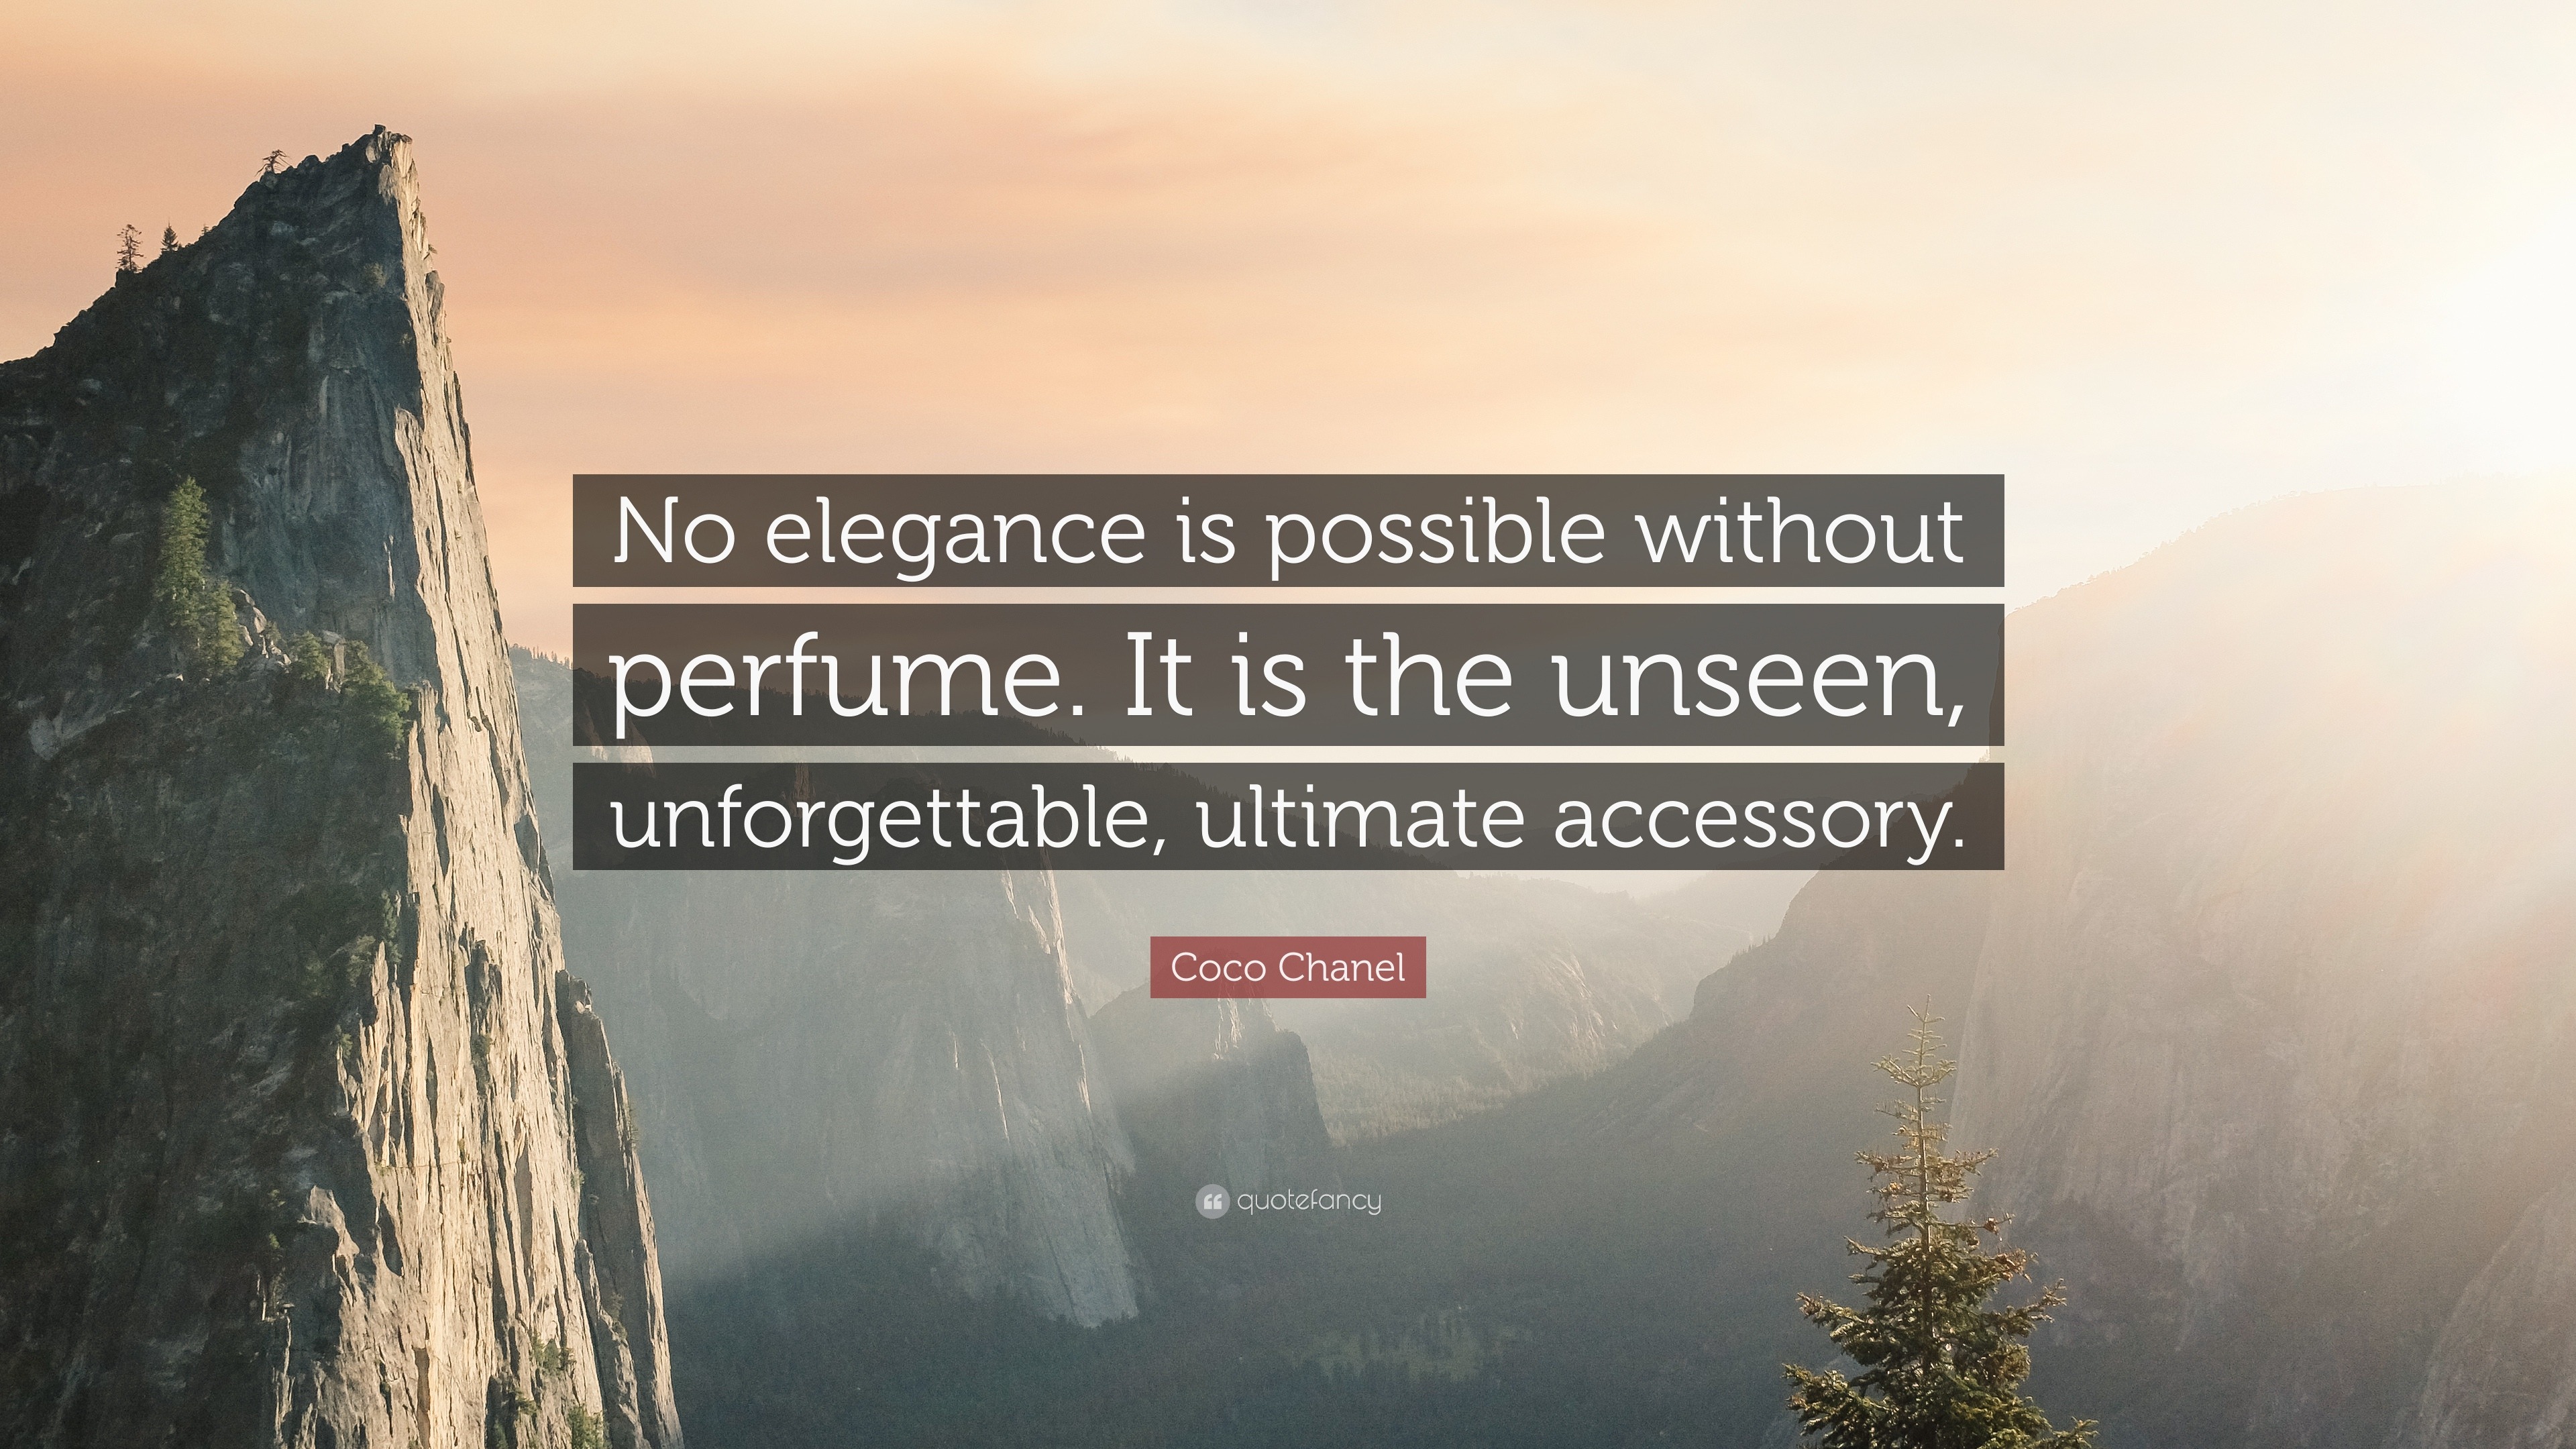 Coco Chanel Quote: “No elegance perfume. It is the unseen, unforgettable, ultimate